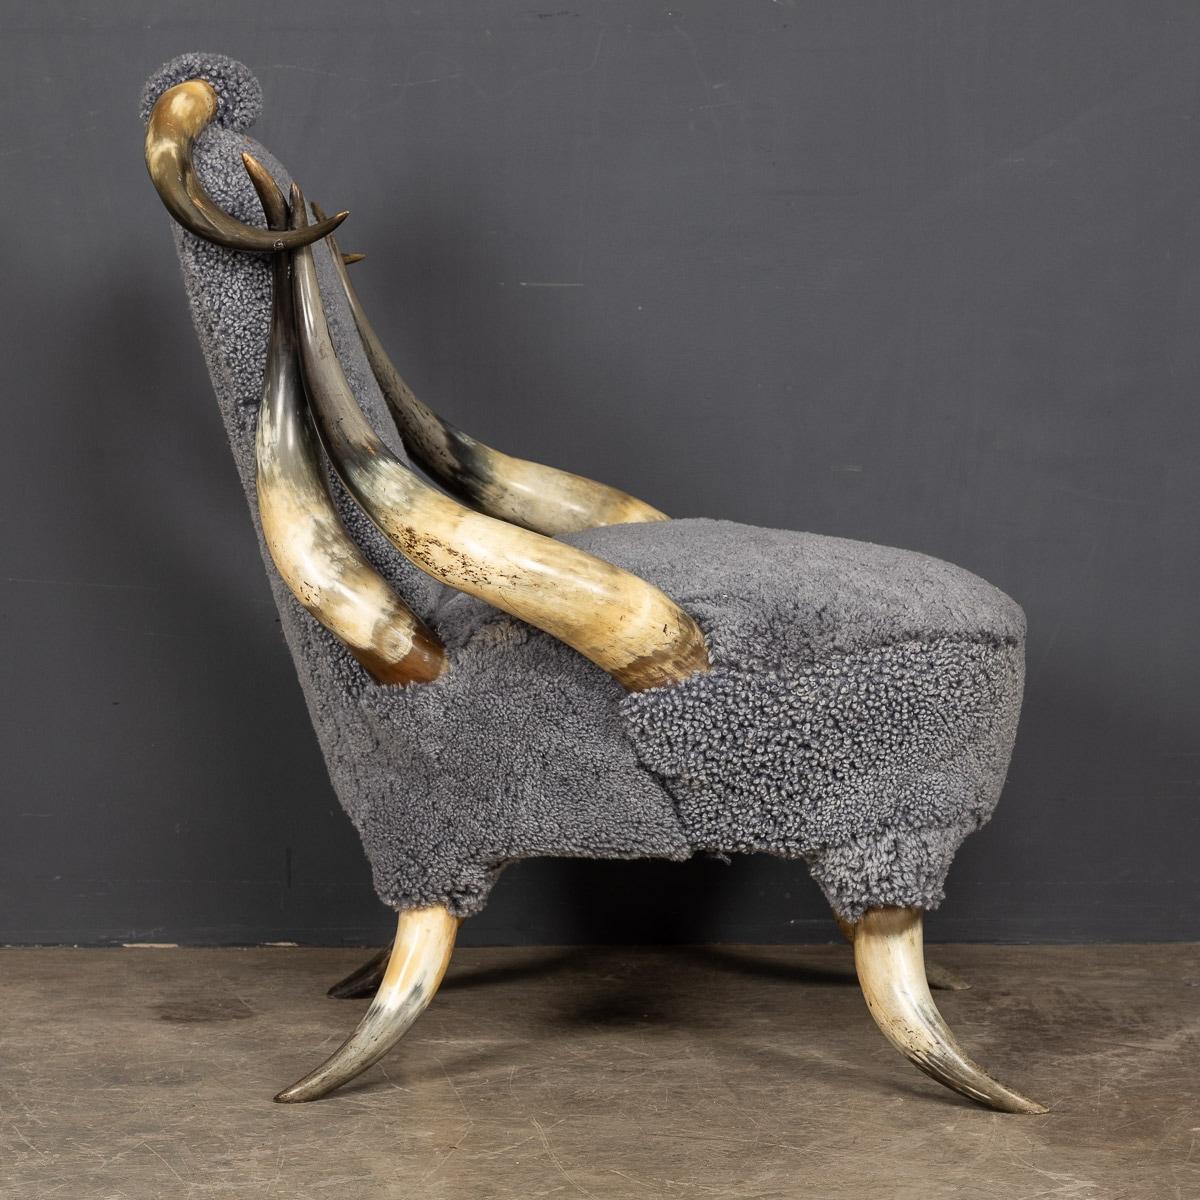 19th Century German Hall Bull Horn Chair, Black Forest, c.1880 For Sale 2